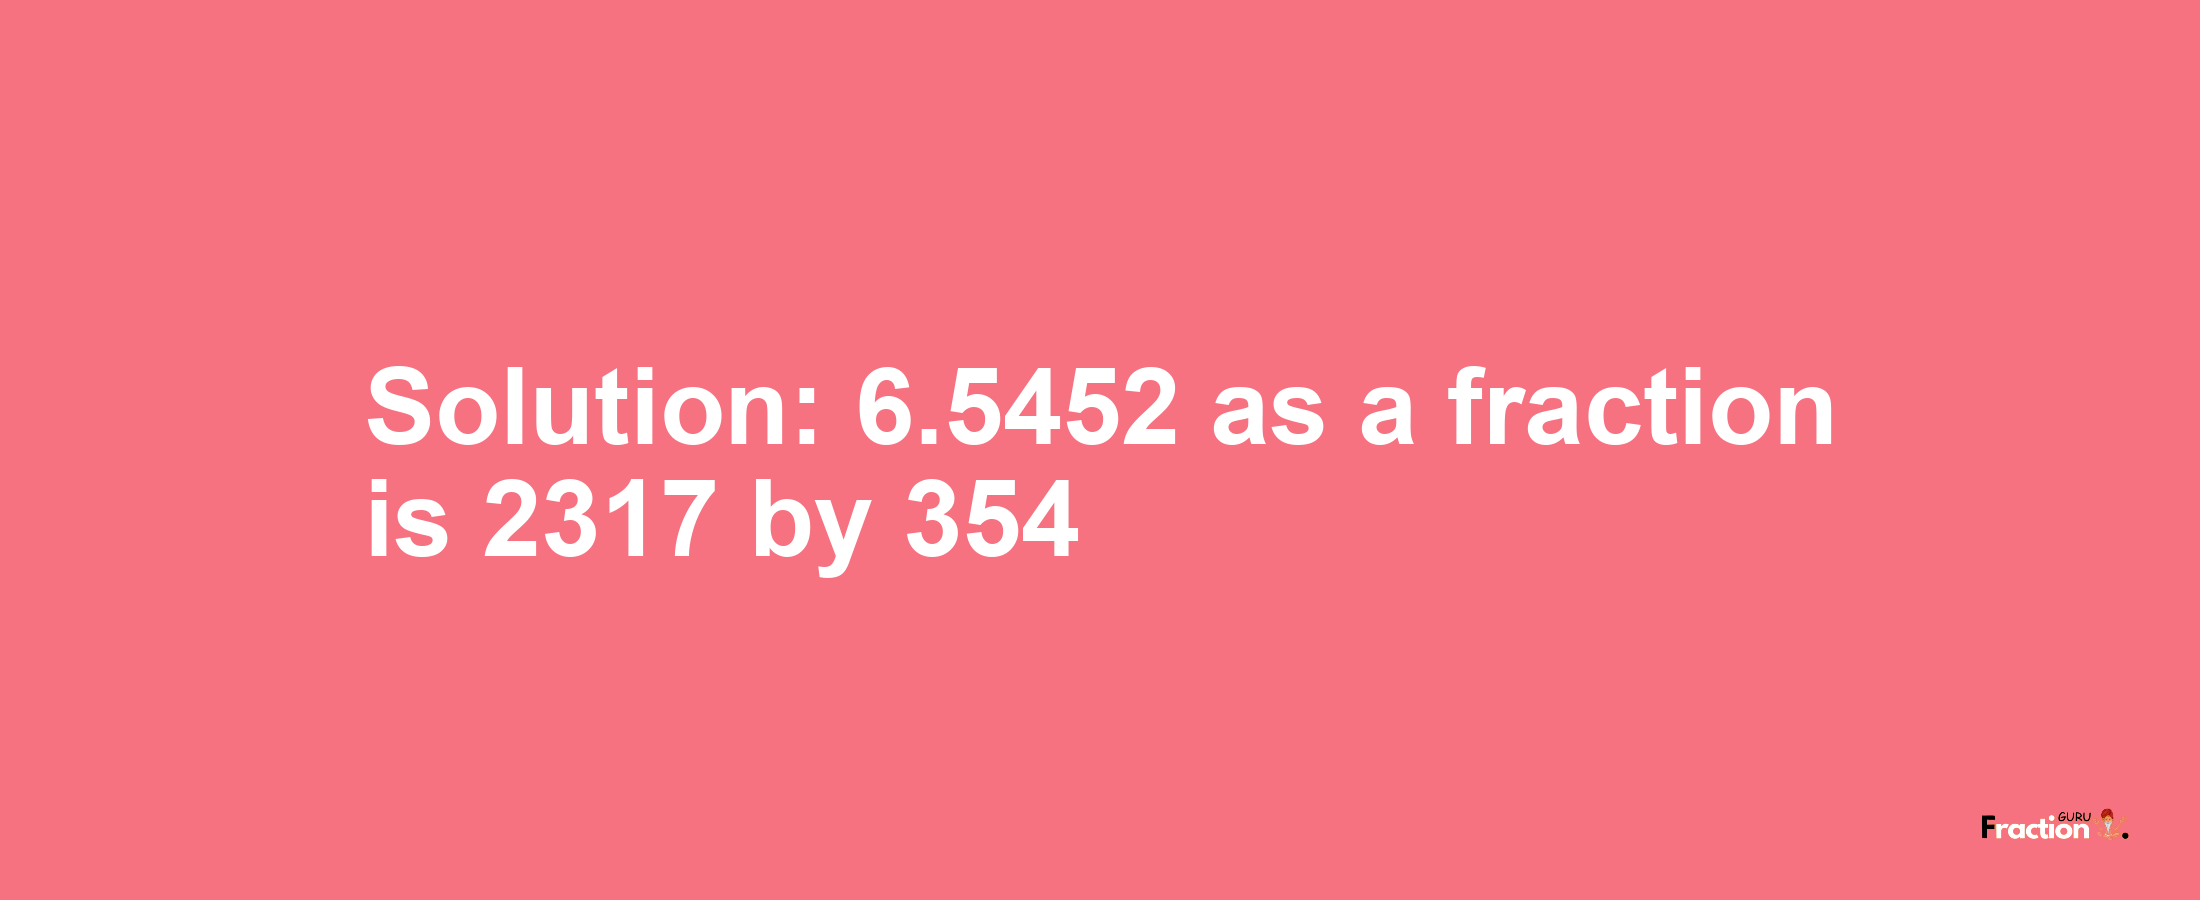 Solution:6.5452 as a fraction is 2317/354